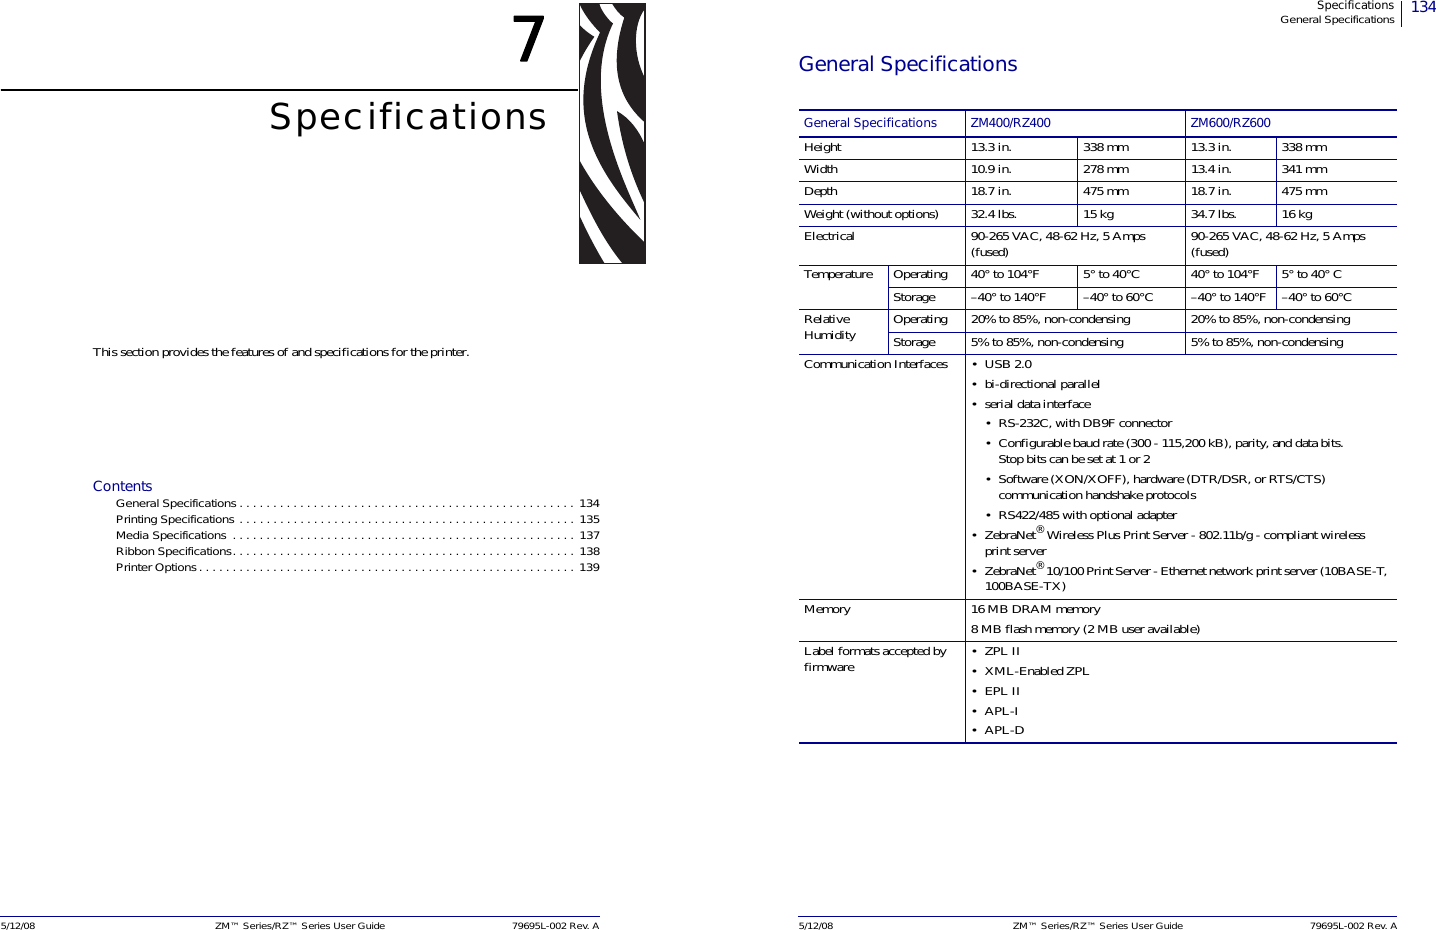 5/12/08 ZM™ Series/RZ™ Series User Guide 79695L-002 Rev. A7SpecificationsThis section provides the features of and specifications for the printer.ContentsGeneral Specifications. . . . . . . . . . . . . . . . . . . . . . . . . . . . . . . . . . . . . . . . . . . . . . . . . . 134Printing Specifications . . . . . . . . . . . . . . . . . . . . . . . . . . . . . . . . . . . . . . . . . . . . . . . . . . 135Media Specifications  . . . . . . . . . . . . . . . . . . . . . . . . . . . . . . . . . . . . . . . . . . . . . . . . . . . 137Ribbon Specifications. . . . . . . . . . . . . . . . . . . . . . . . . . . . . . . . . . . . . . . . . . . . . . . . . . . 138Printer Options. . . . . . . . . . . . . . . . . . . . . . . . . . . . . . . . . . . . . . . . . . . . . . . . . . . . . . . . 139134SpecificationsGeneral Specifications5/12/08 ZM™ Series/RZ™ Series User Guide 79695L-002 Rev. AGeneral SpecificationsGeneral Specifications ZM400/RZ400 ZM600/RZ600Height 13.3 in. 338 mm 13.3 in. 338 mmWidth 10.9 in. 278 mm 13.4 in. 341 mmDepth 18.7 in. 475 mm 18.7 in. 475 mmWeight (without options) 32.4 lbs. 15 kg 34.7 lbs. 16 kgElectrical 90-265 VAC, 48-62 Hz, 5 Amps (fused) 90-265 VAC, 48-62 Hz, 5 Amps (fused)Temperature Operating 40° to 104°F  5° to 40°C 40° to 104°F 5° to 40° CStorage –40° to 140°F –40° to 60°C –40° to 140°F –40° to 60°CRelative Humidity Operating 20% to 85%, non-condensing 20% to 85%, non-condensingStorage 5% to 85%, non-condensing 5% to 85%, non-condensingCommunication Interfaces • USB 2.0• bi-directional parallel• serial data interface• RS-232C, with DB9F connector• Configurable baud rate (300 - 115,200 kB), parity, and data bits. Stop bits can be set at 1 or 2• Software (XON/XOFF), hardware (DTR/DSR, or RTS/CTS) communication handshake protocols• RS422/485 with optional adapter•ZebraNet® Wireless Plus Print Server - 802.11b/g - compliant wireless print server •ZebraNet® 10/100 Print Server - Ethernet network print server (10BASE-T, 100BASE-TX) Memory 16 MB DRAM memory8 MB flash memory (2 MB user available)Label formats accepted by firmware •ZPL II•XML-Enabled ZPL•EPL II•APL-I•APL-D